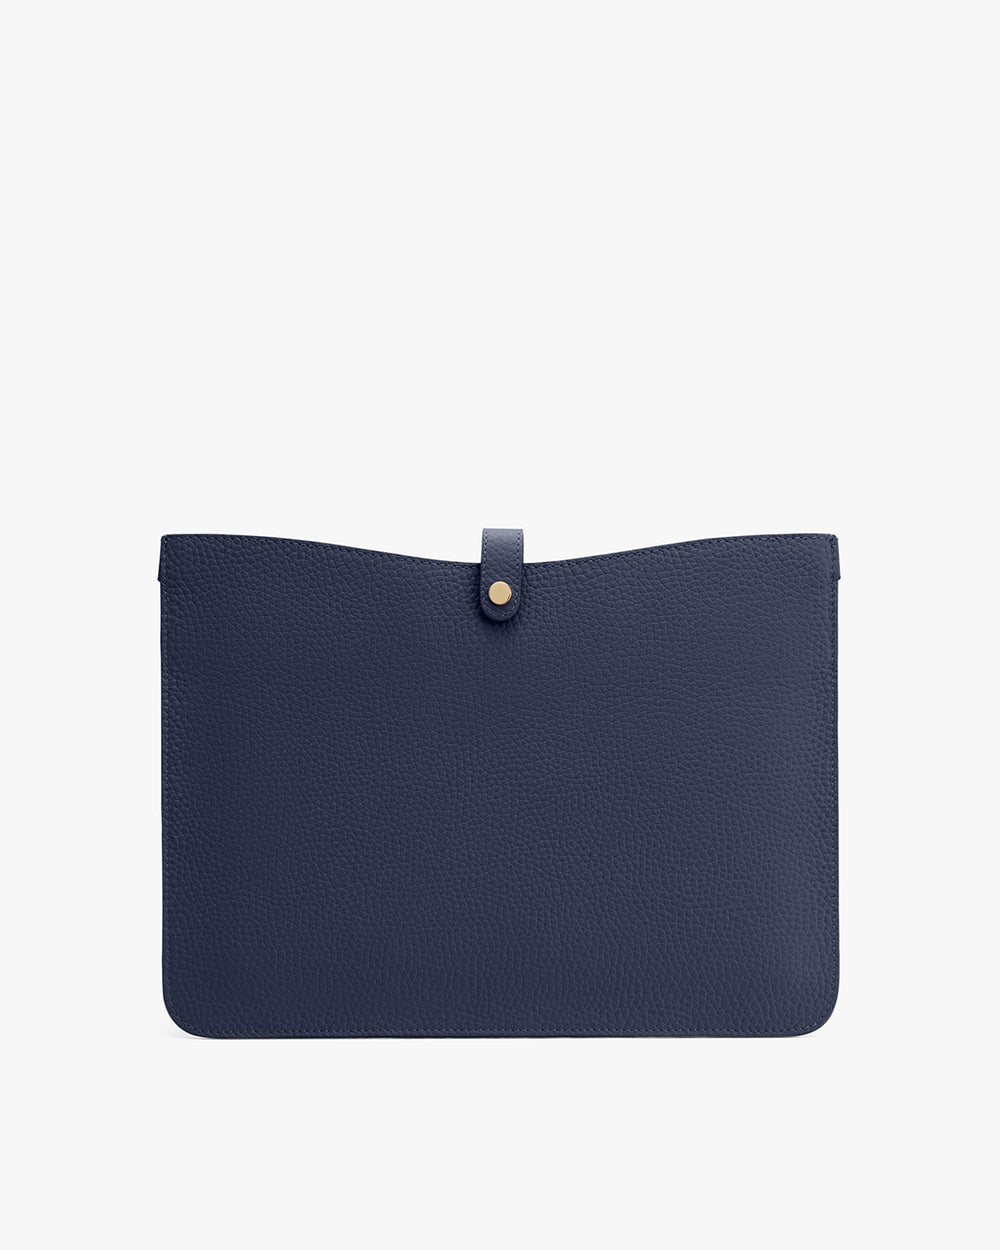 Textured clutch bag with a flap closure and button fastener.